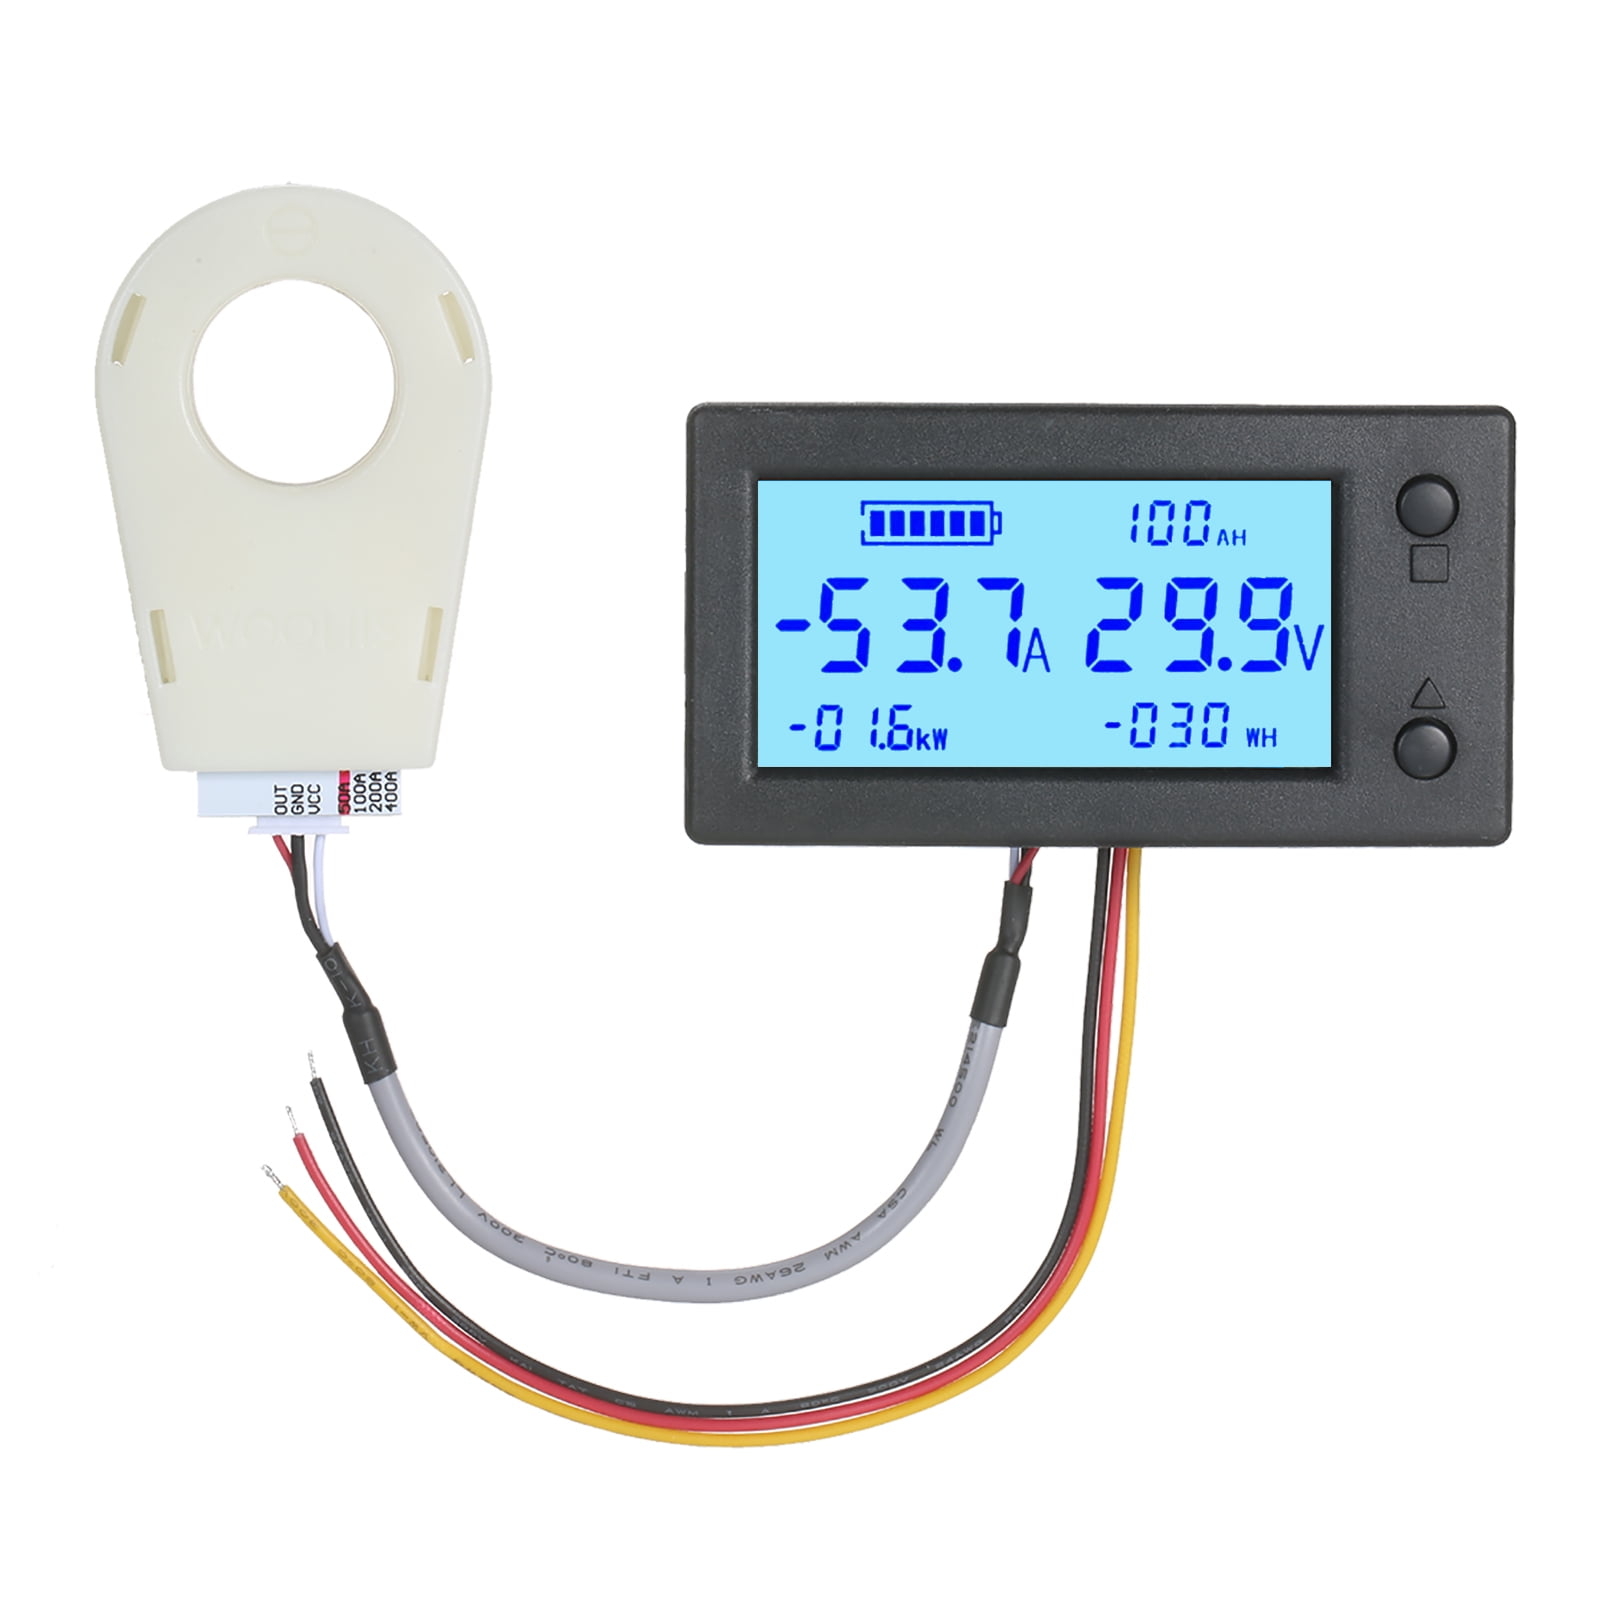 Details about     LCD Display Digital Current Ammeter Amp Meter Amperage Monitor Gauge with 100A 